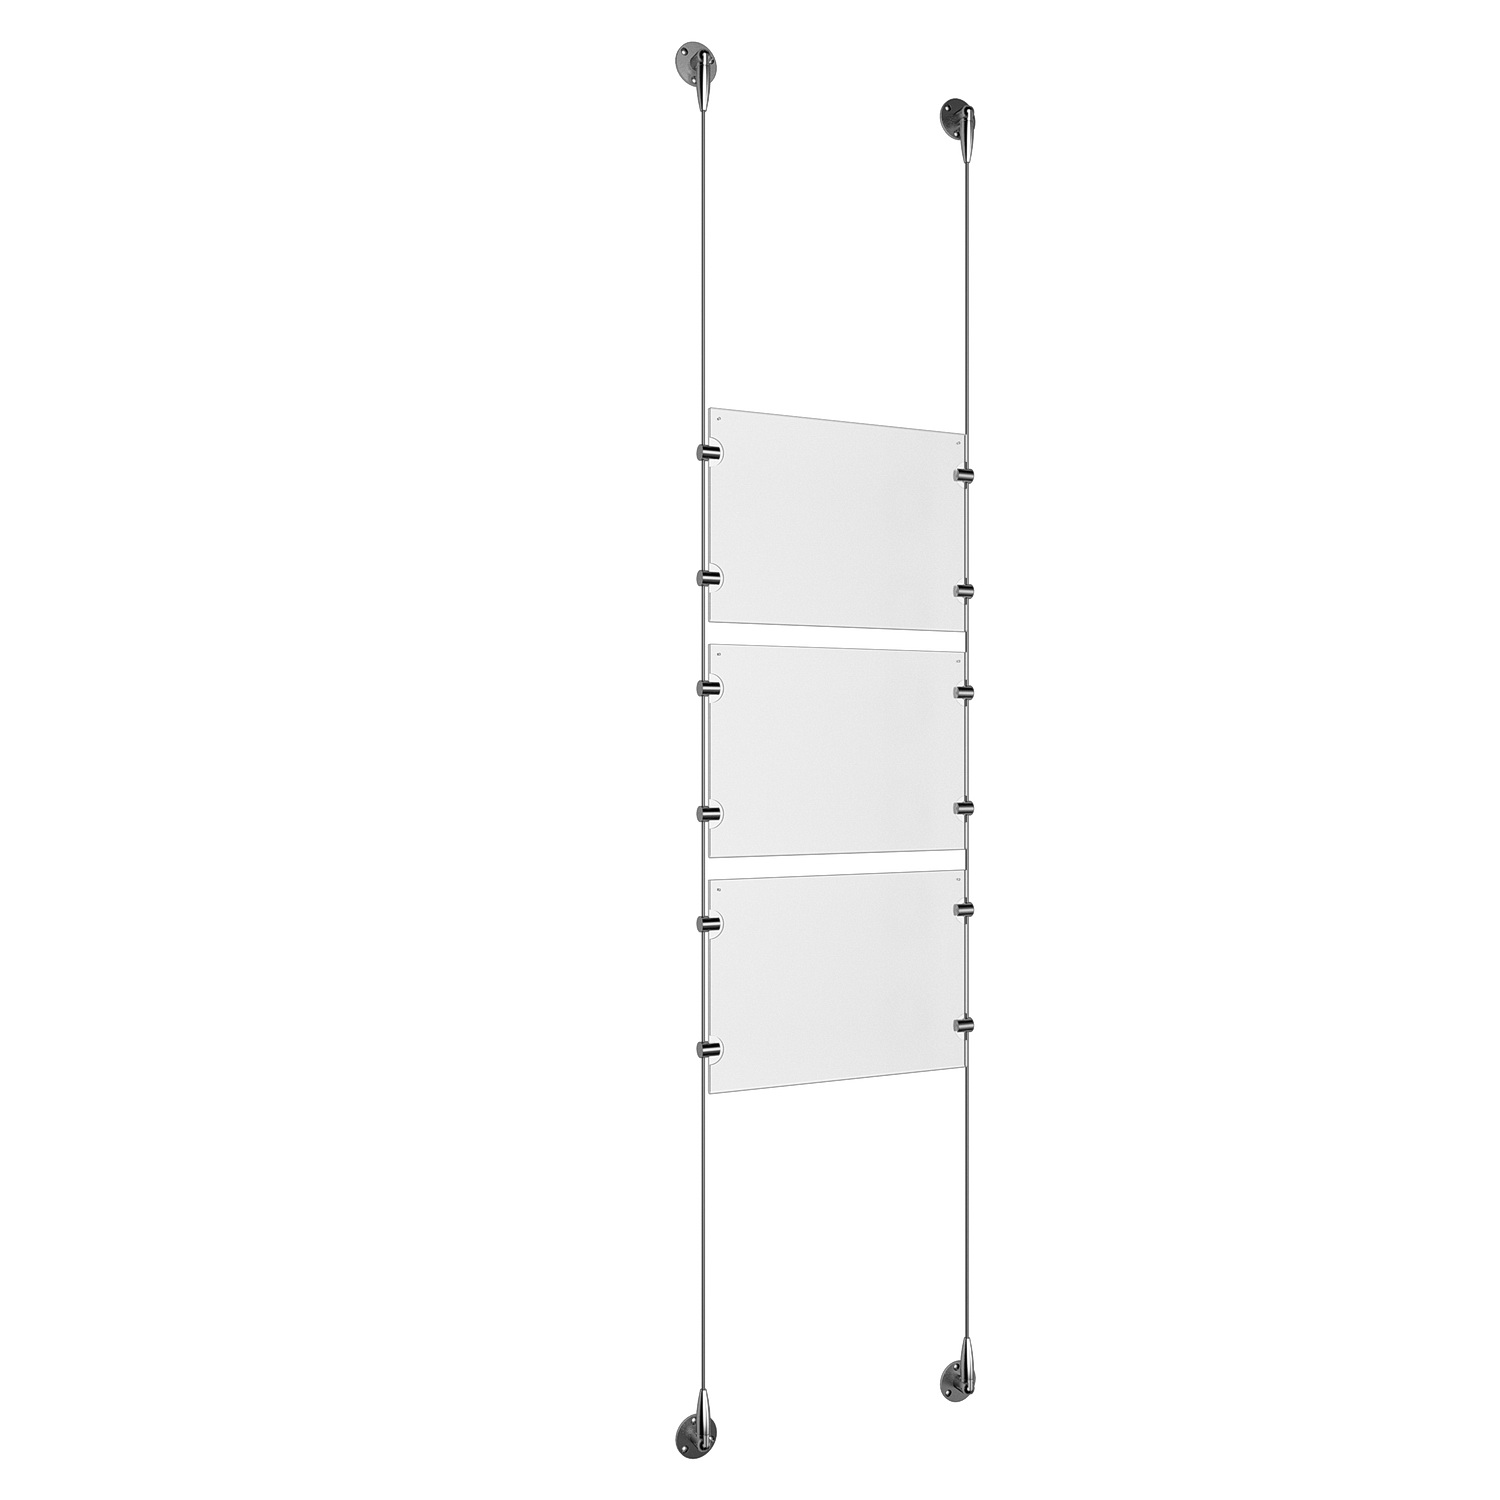 (3) 11'' Width x 8-1/2'' Height Clear Acrylic Frame & (2) Stainless Steel Satin Brushed Adjustable Angle Signature 1/8'' Cable Systems with (12) Single-Sided Panel Grippers